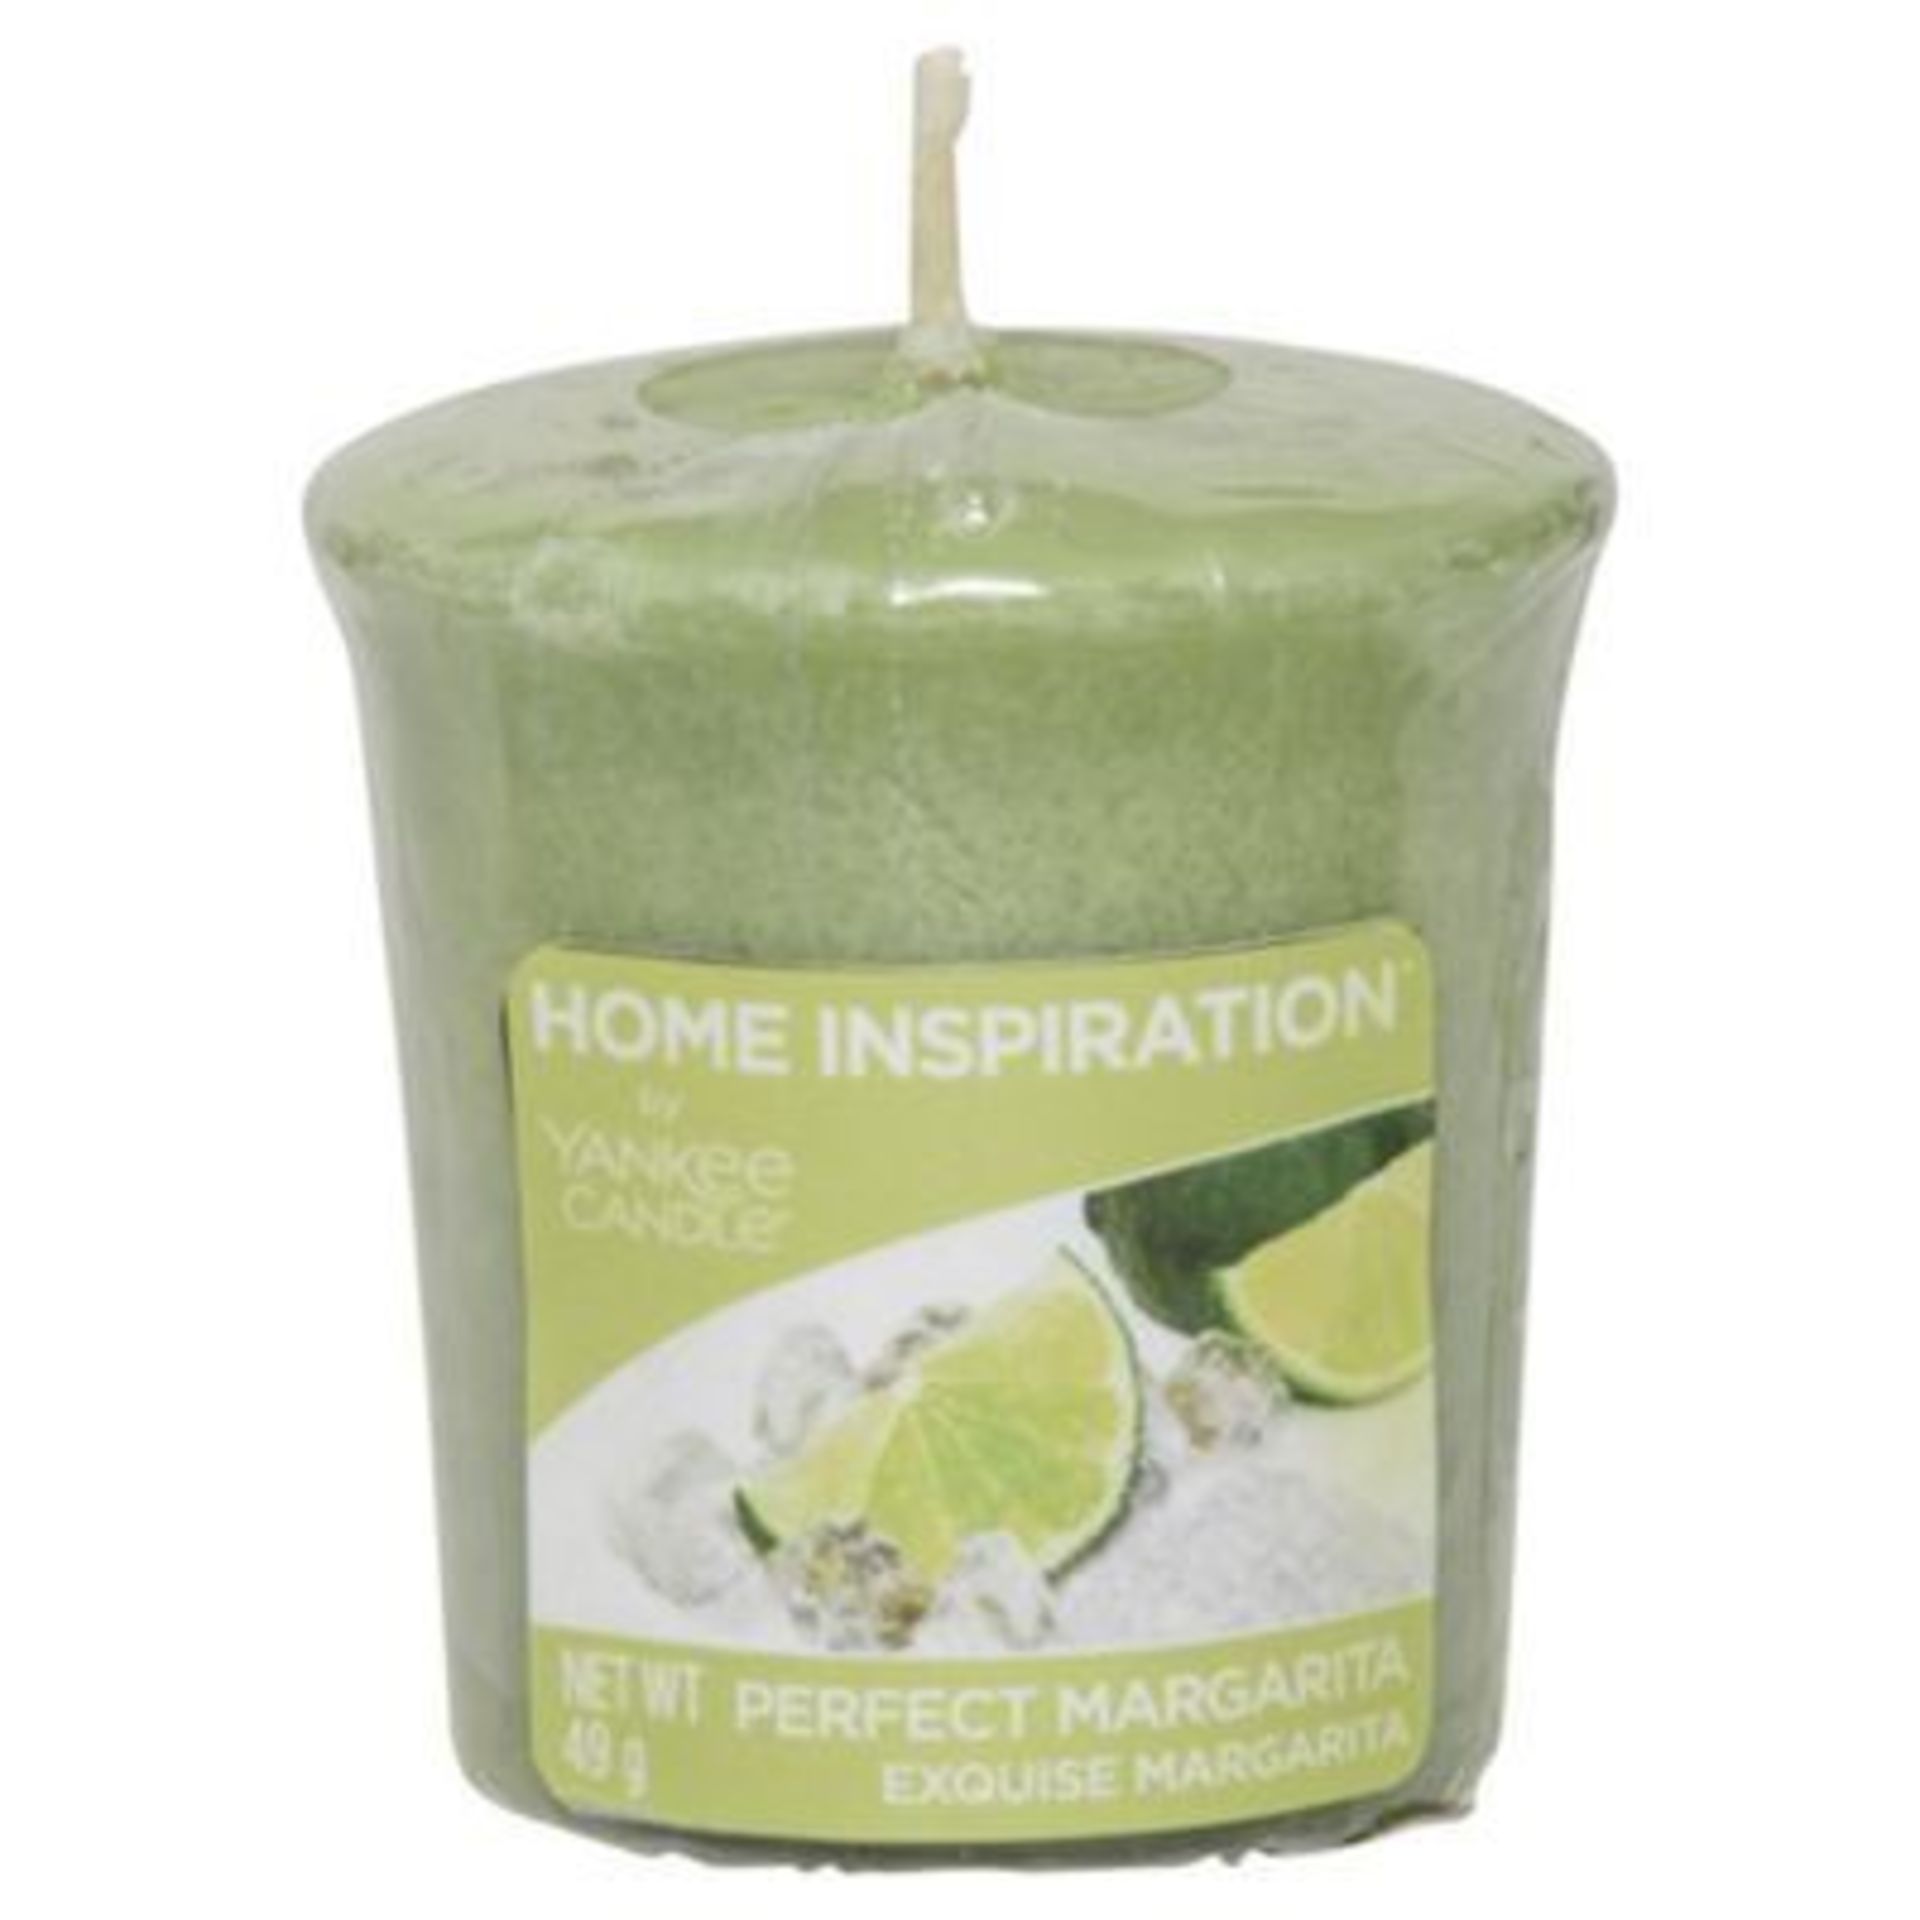 V *TRADE QTY* Brand New 18 X Yankee Candle Votive Perfect Margarita - eBay Price £107.82 X 3 YOUR - Image 2 of 2